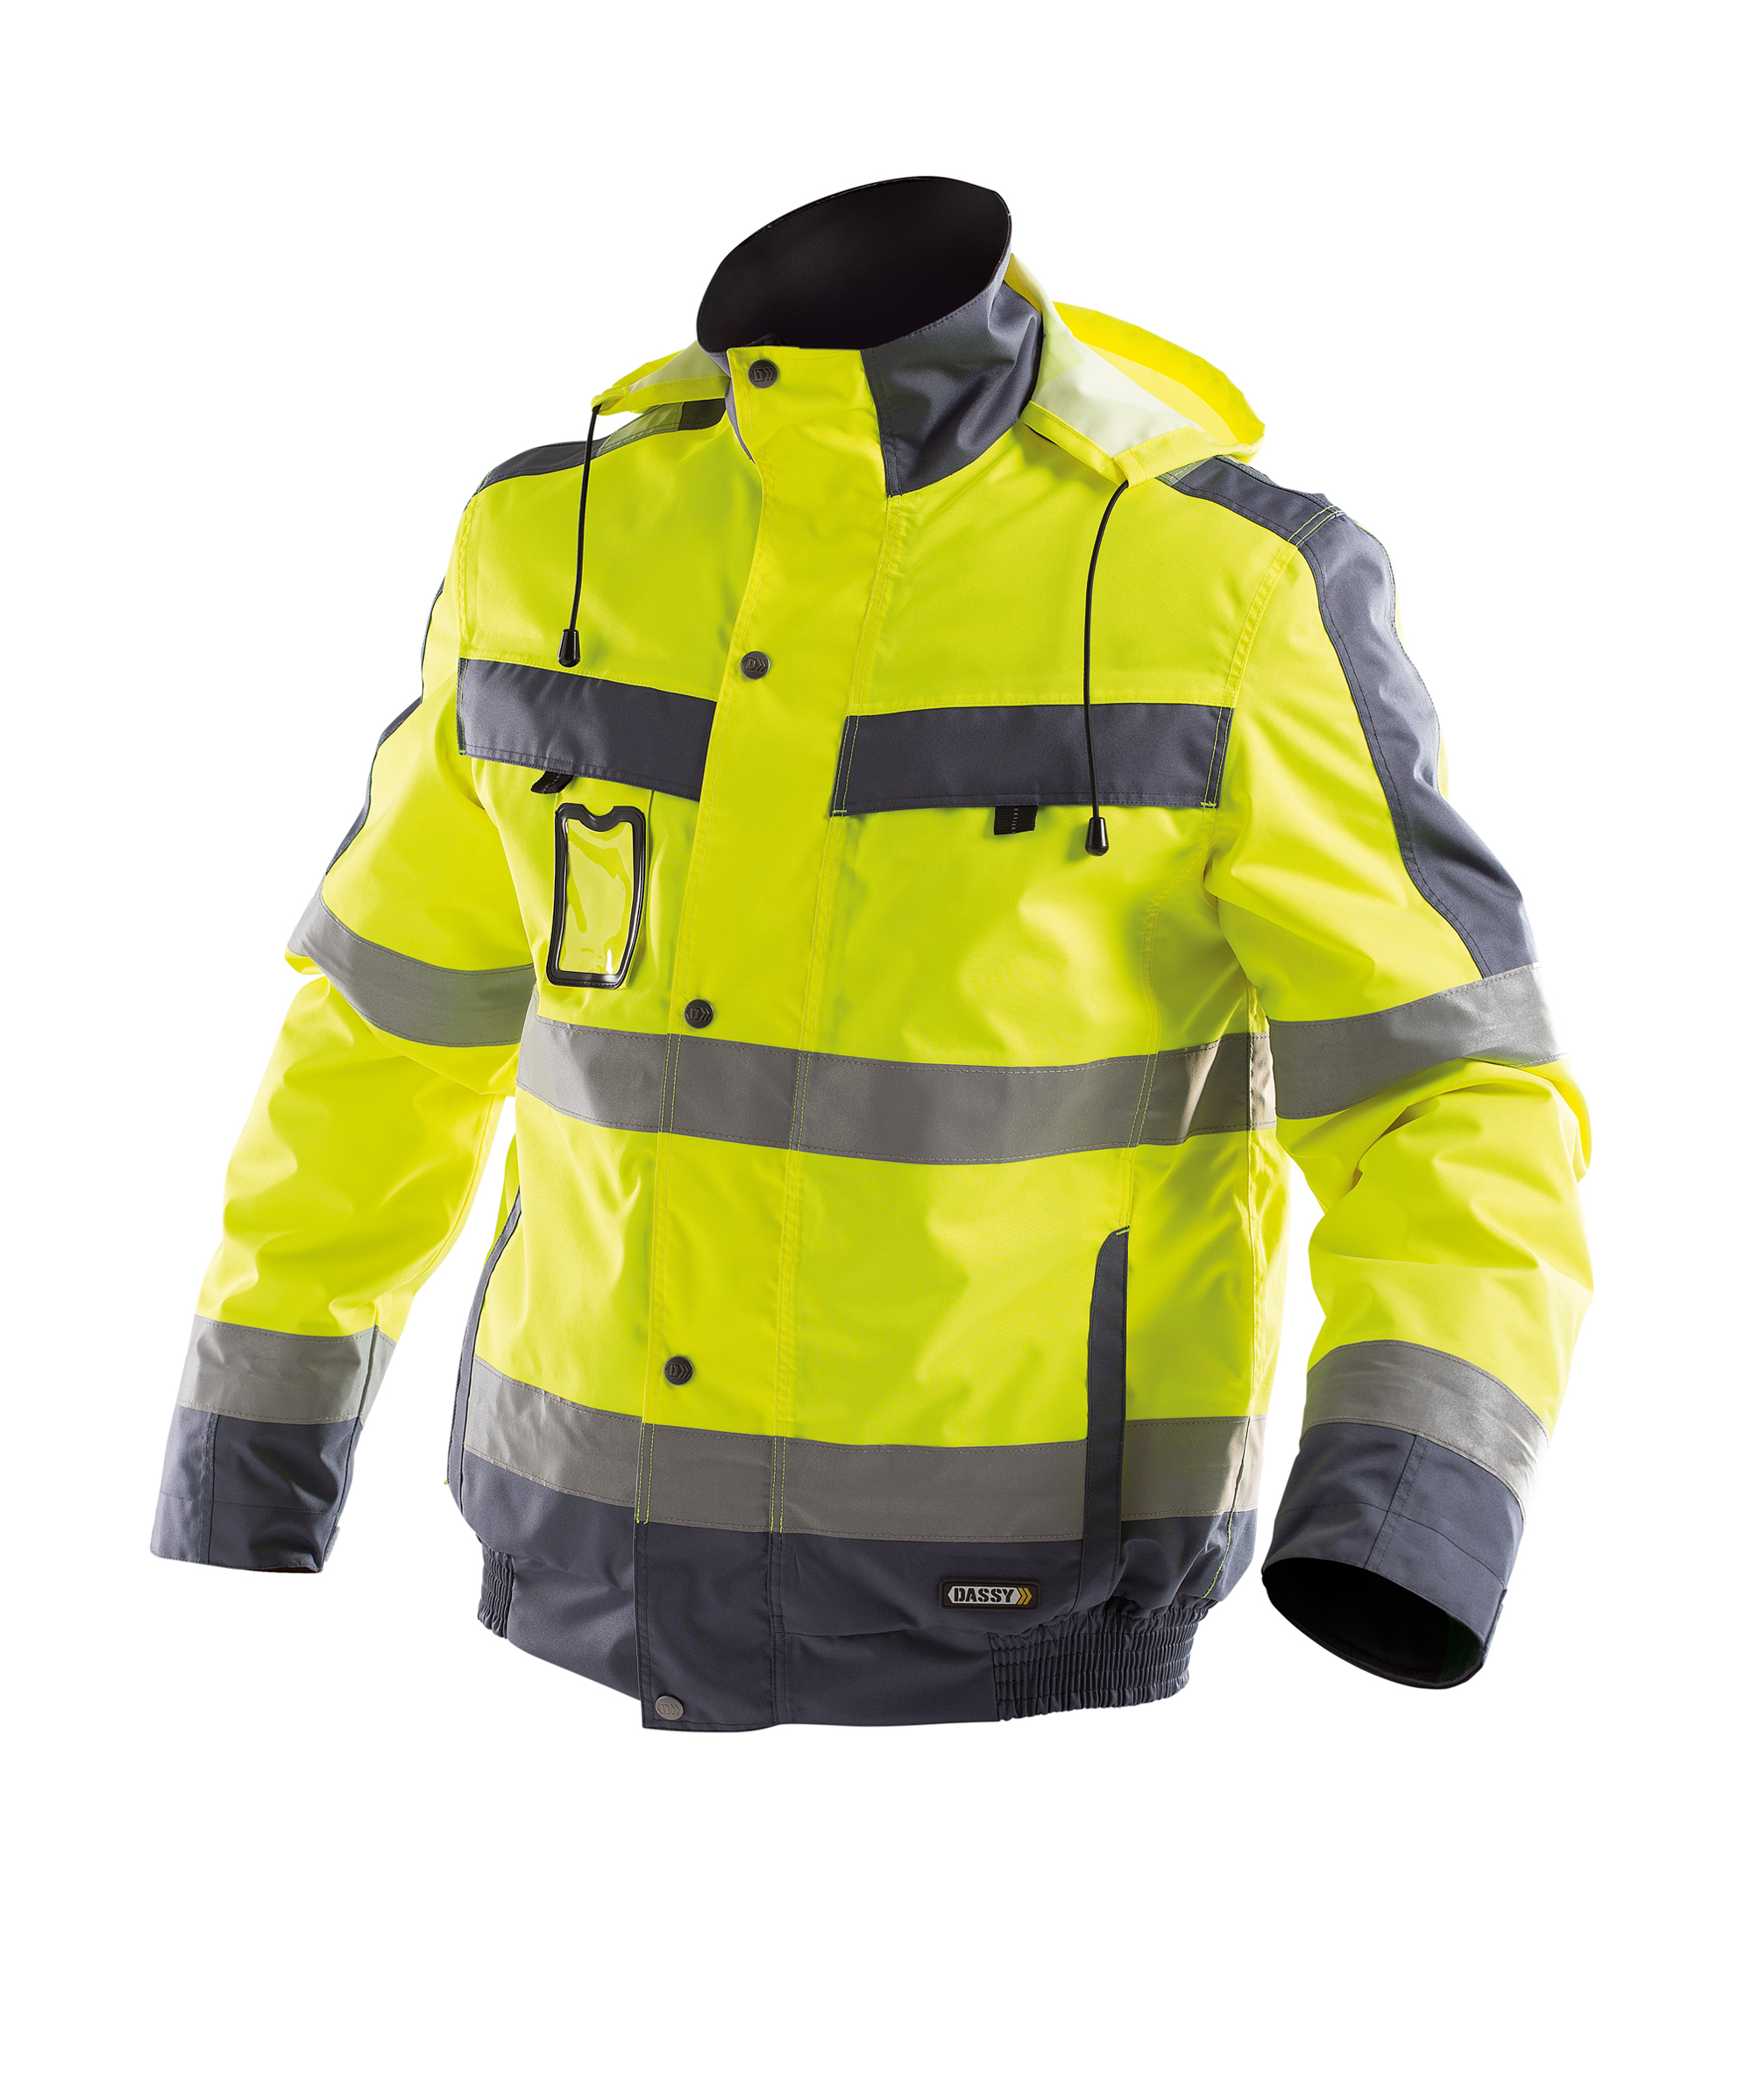 lima_high-visibility-winter-jacket_fluo-yellow-cement-grey_front.jpg